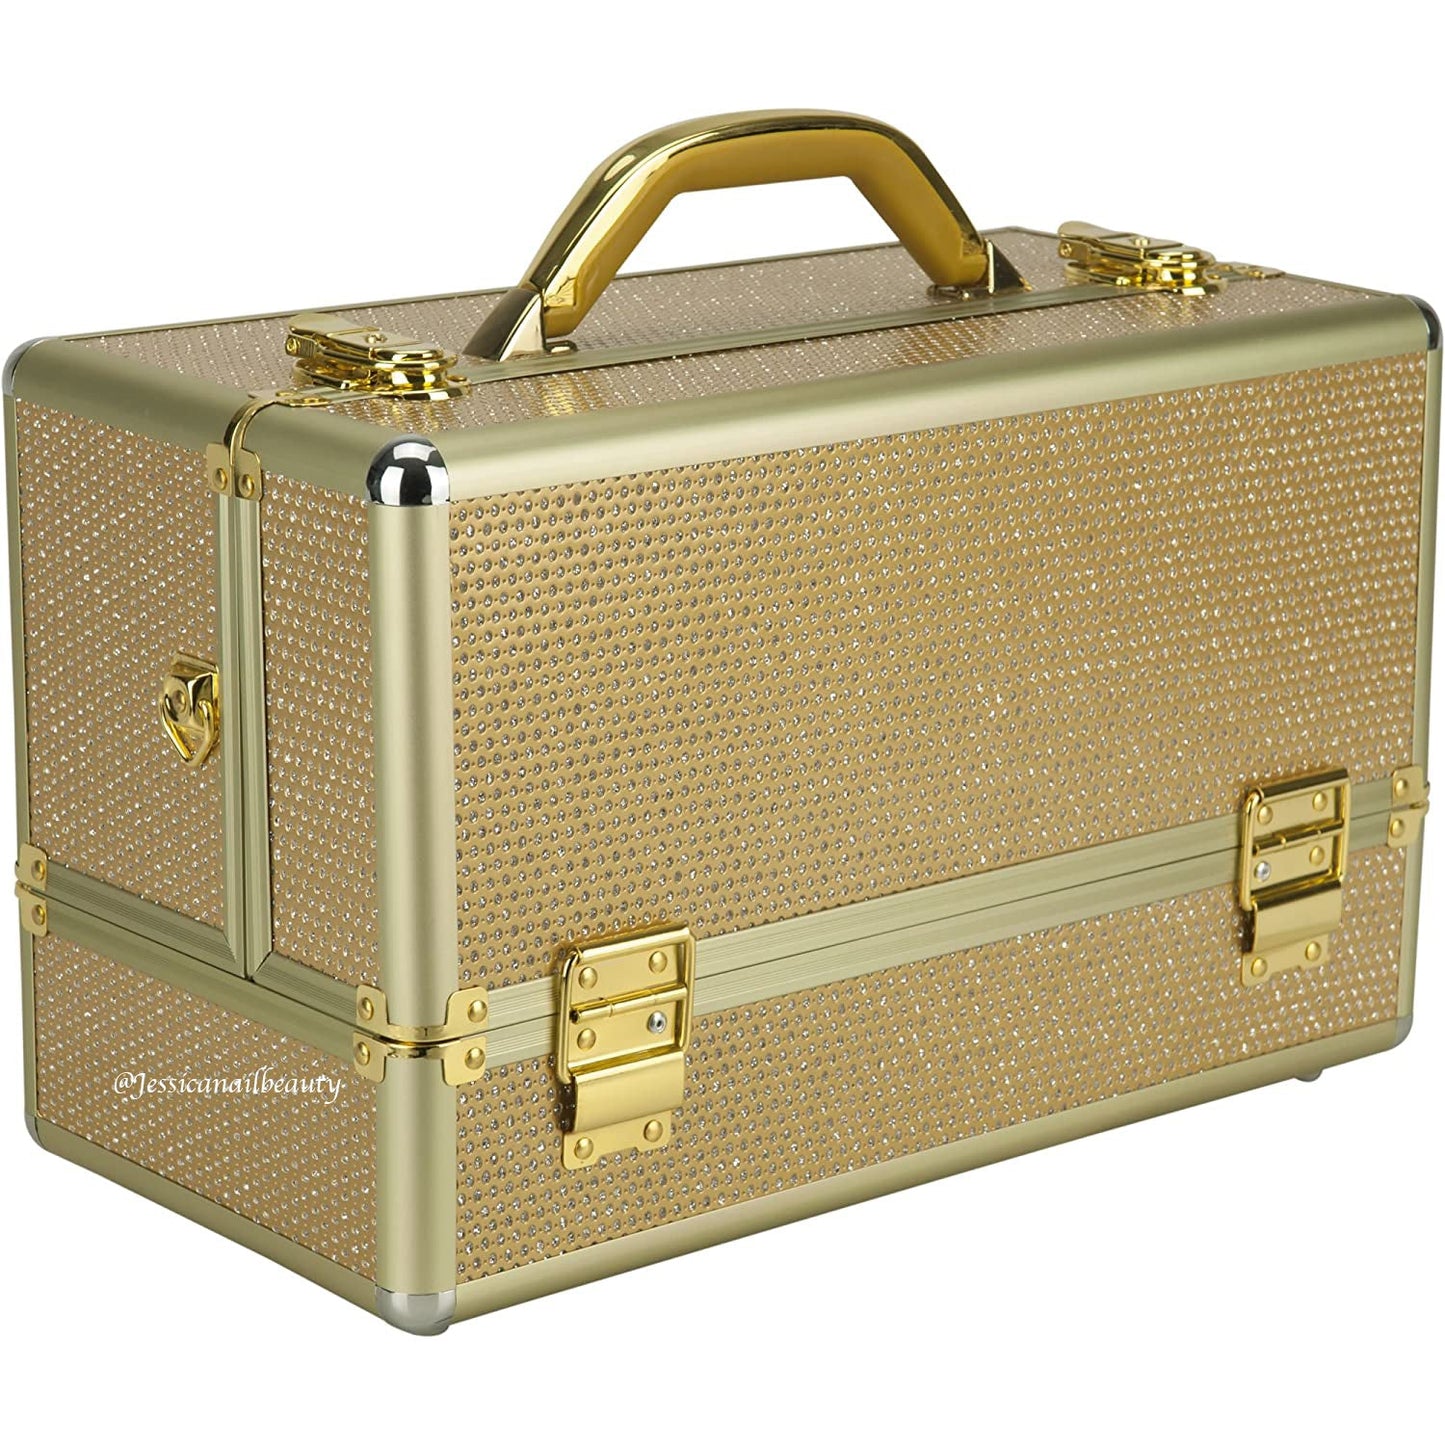 Professional Aluminum Makeup Case - Crystal Gold (15" x 7.5" x 10.5")(Key included)